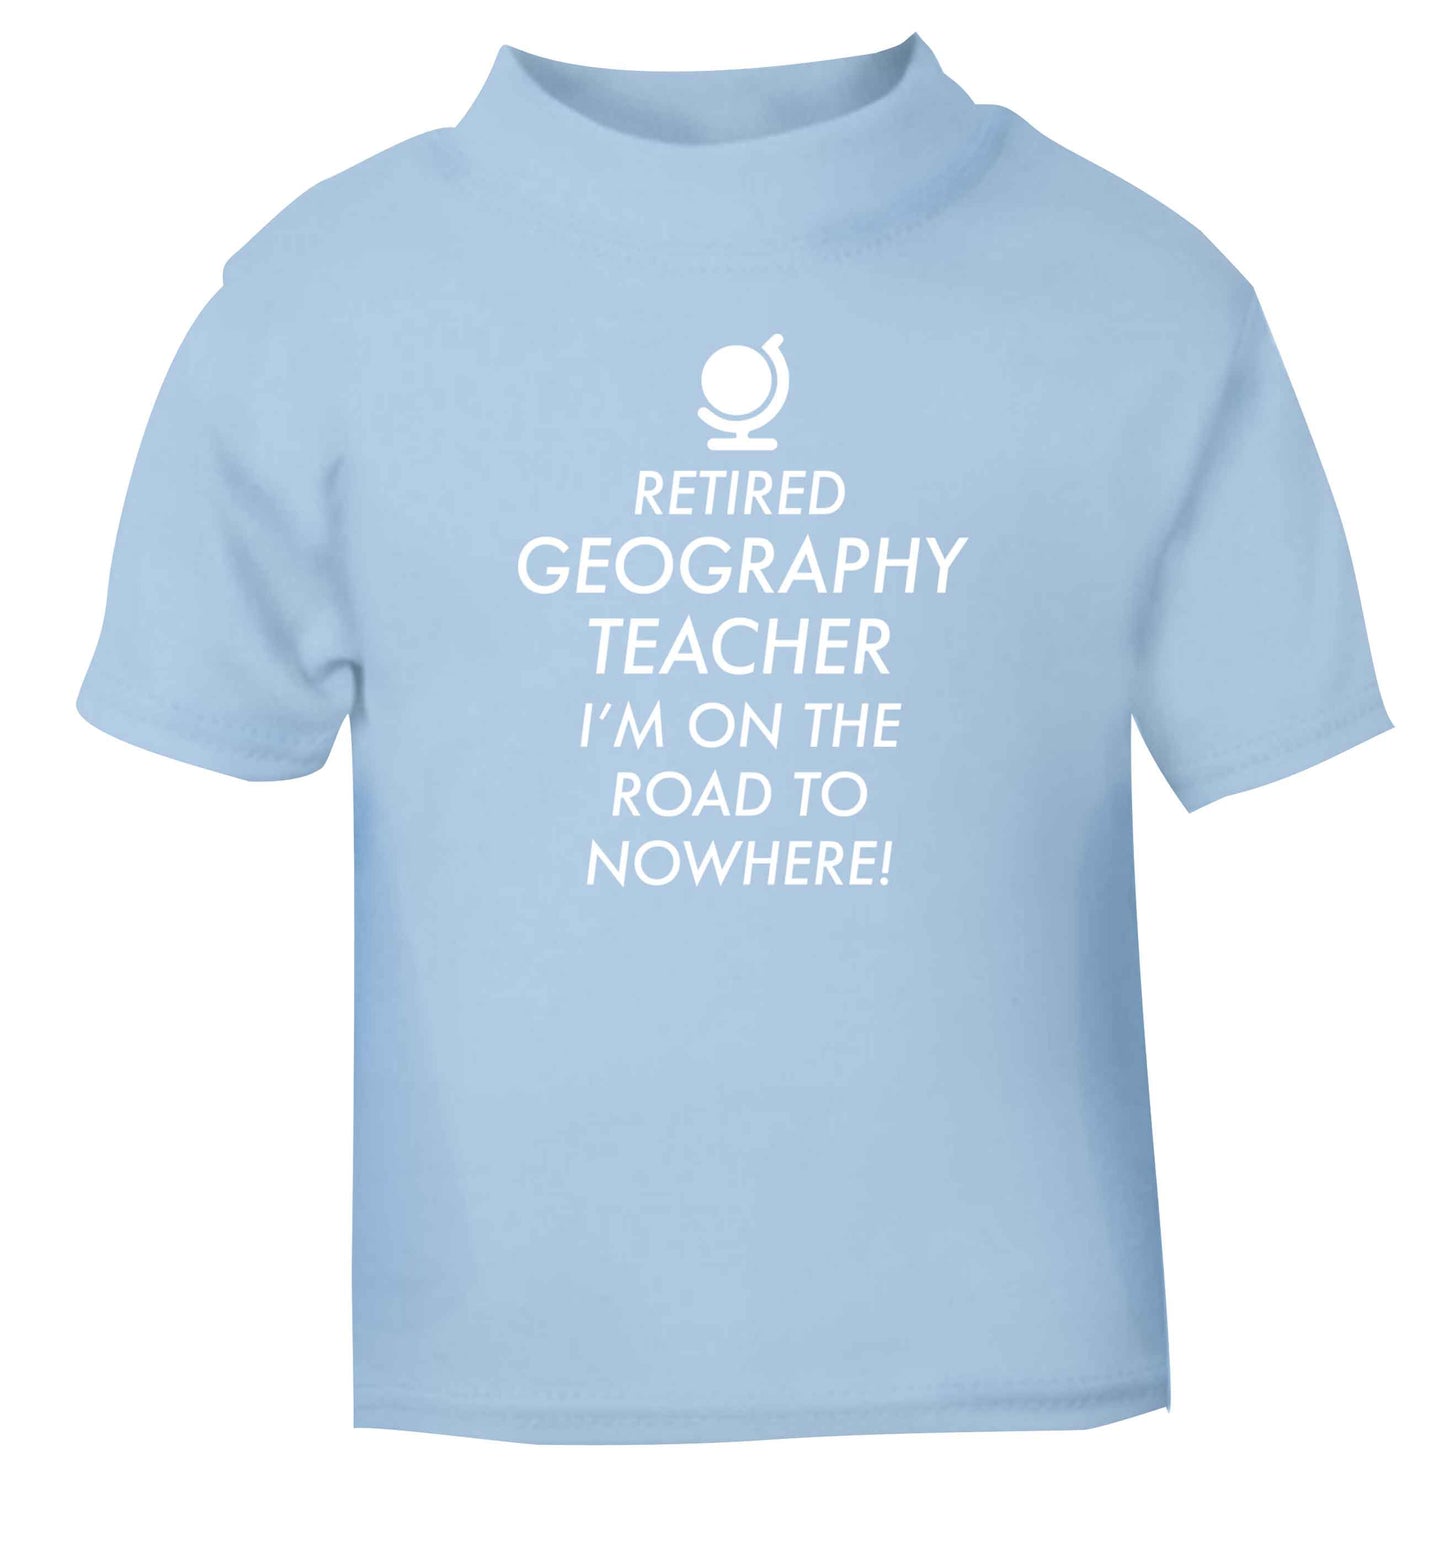 Retired geography teacher I'm on the road to nowhere light blue Baby Toddler Tshirt 2 Years